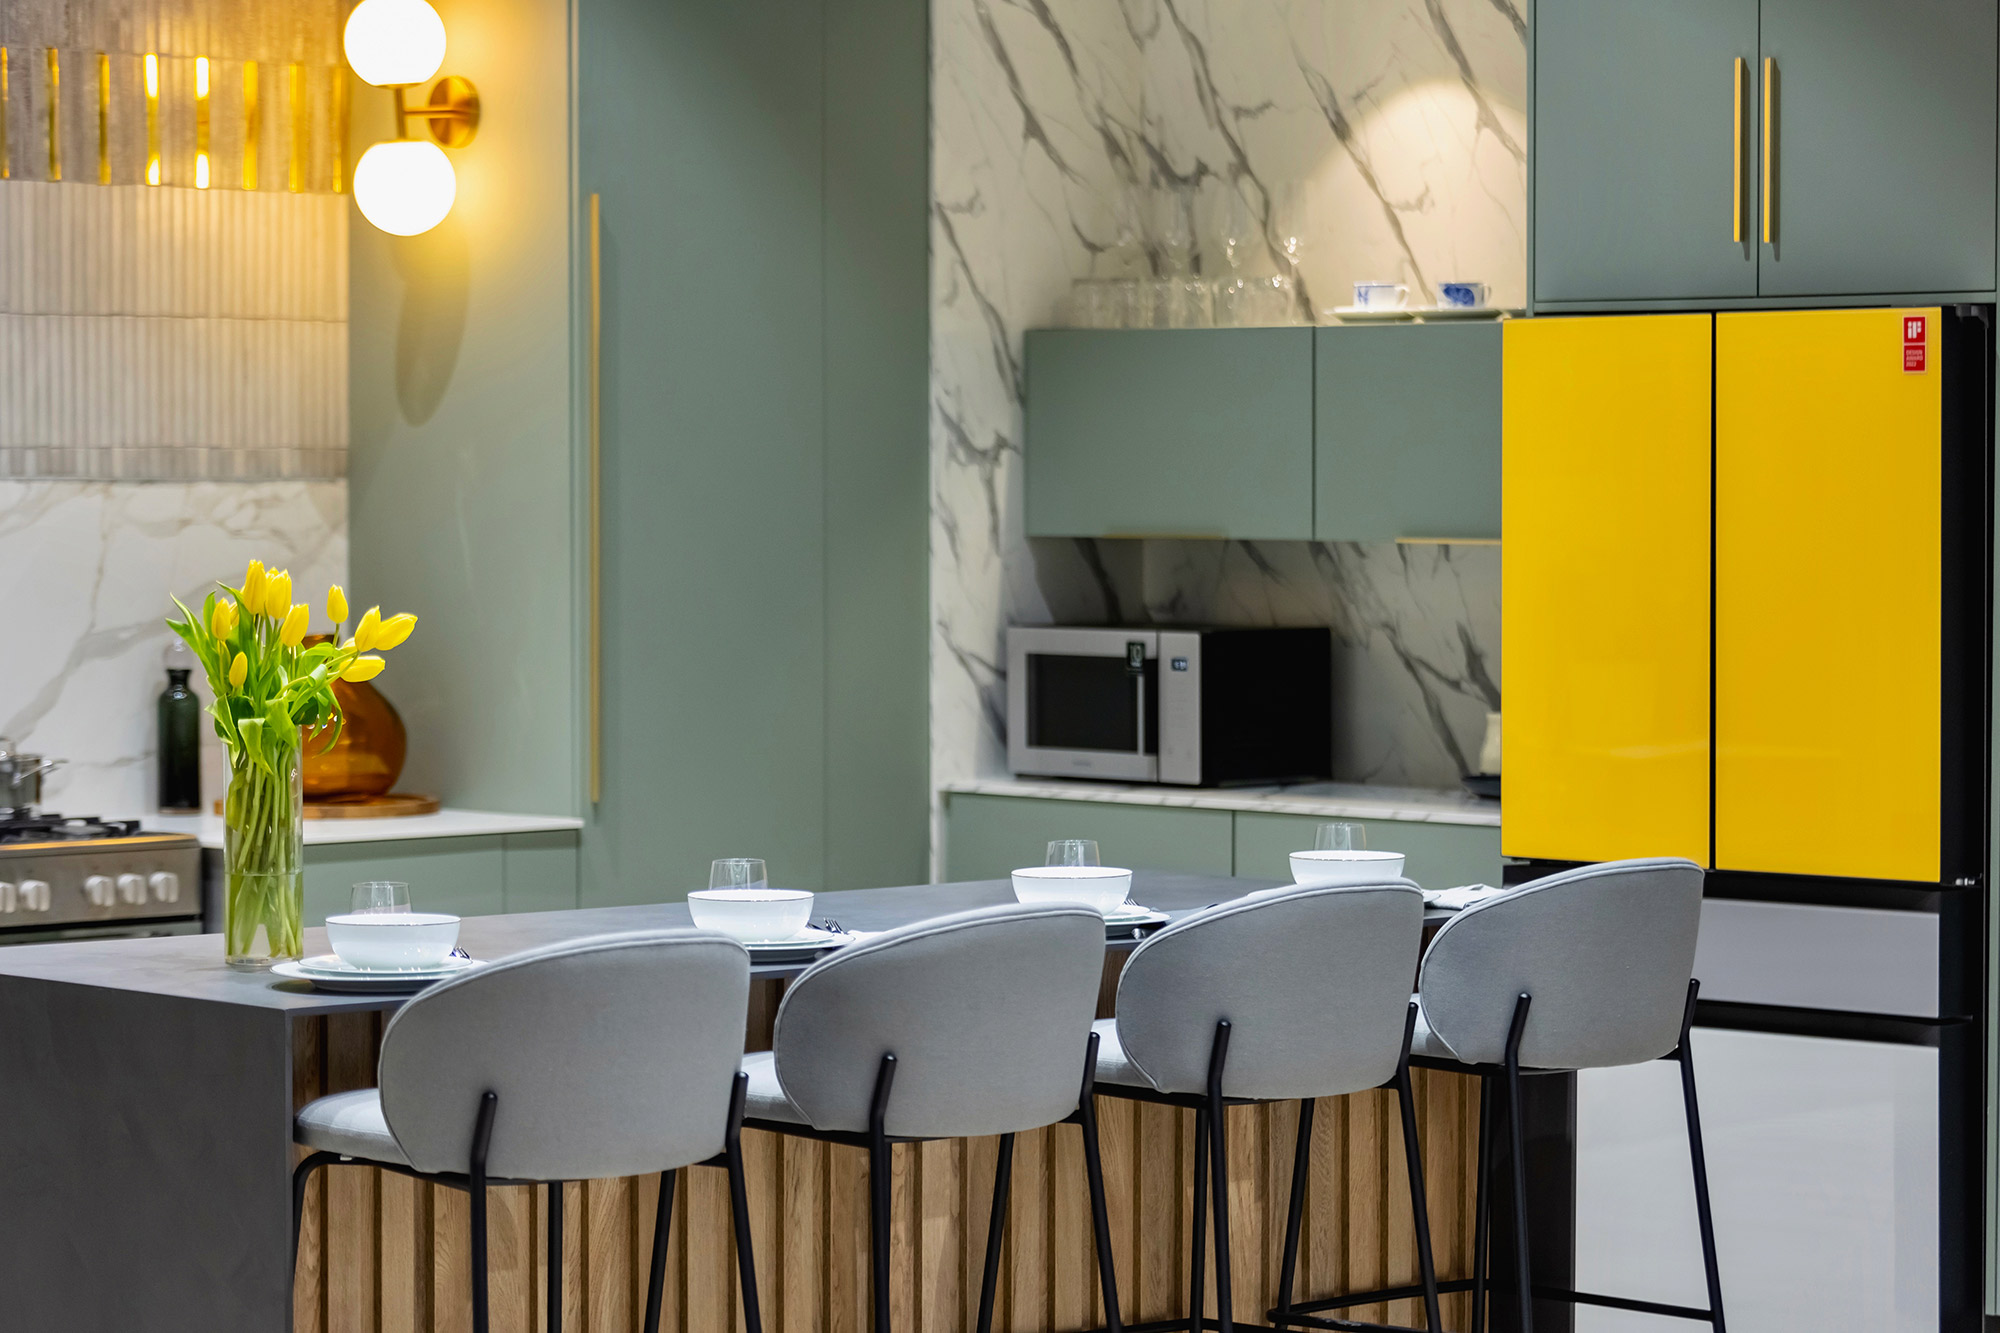 Image of Samsung Bespoke 106 in Silestone, selected for the worktop of the Hyatt Regency’s demanding dining room for its extraordinary hygienic capabilities - Cosentino